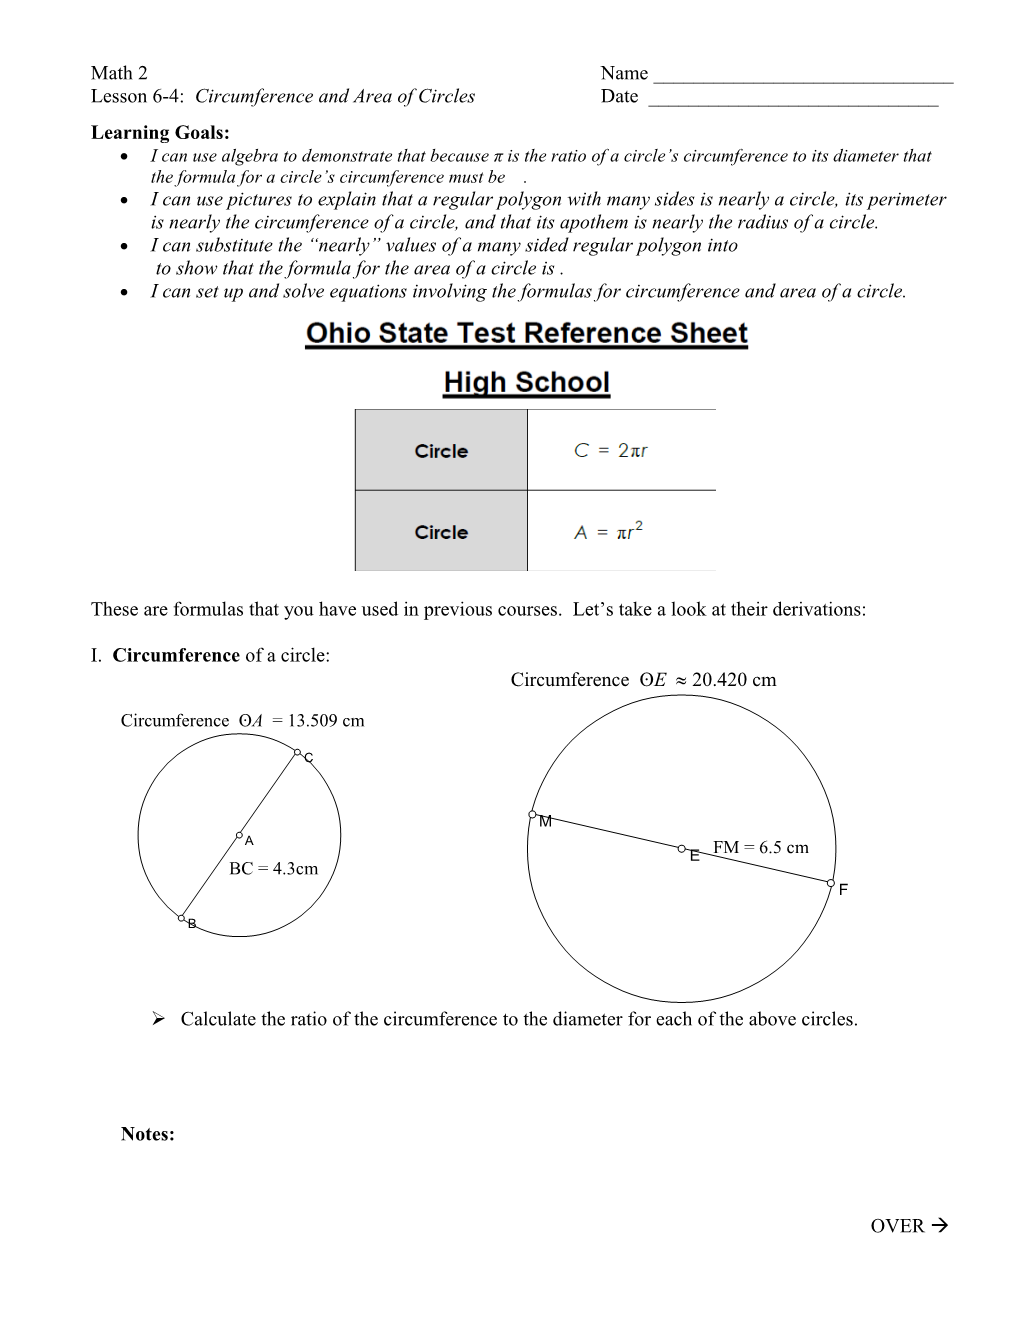 Lesson 6-4: Circumference and Area of Circlesdate ______